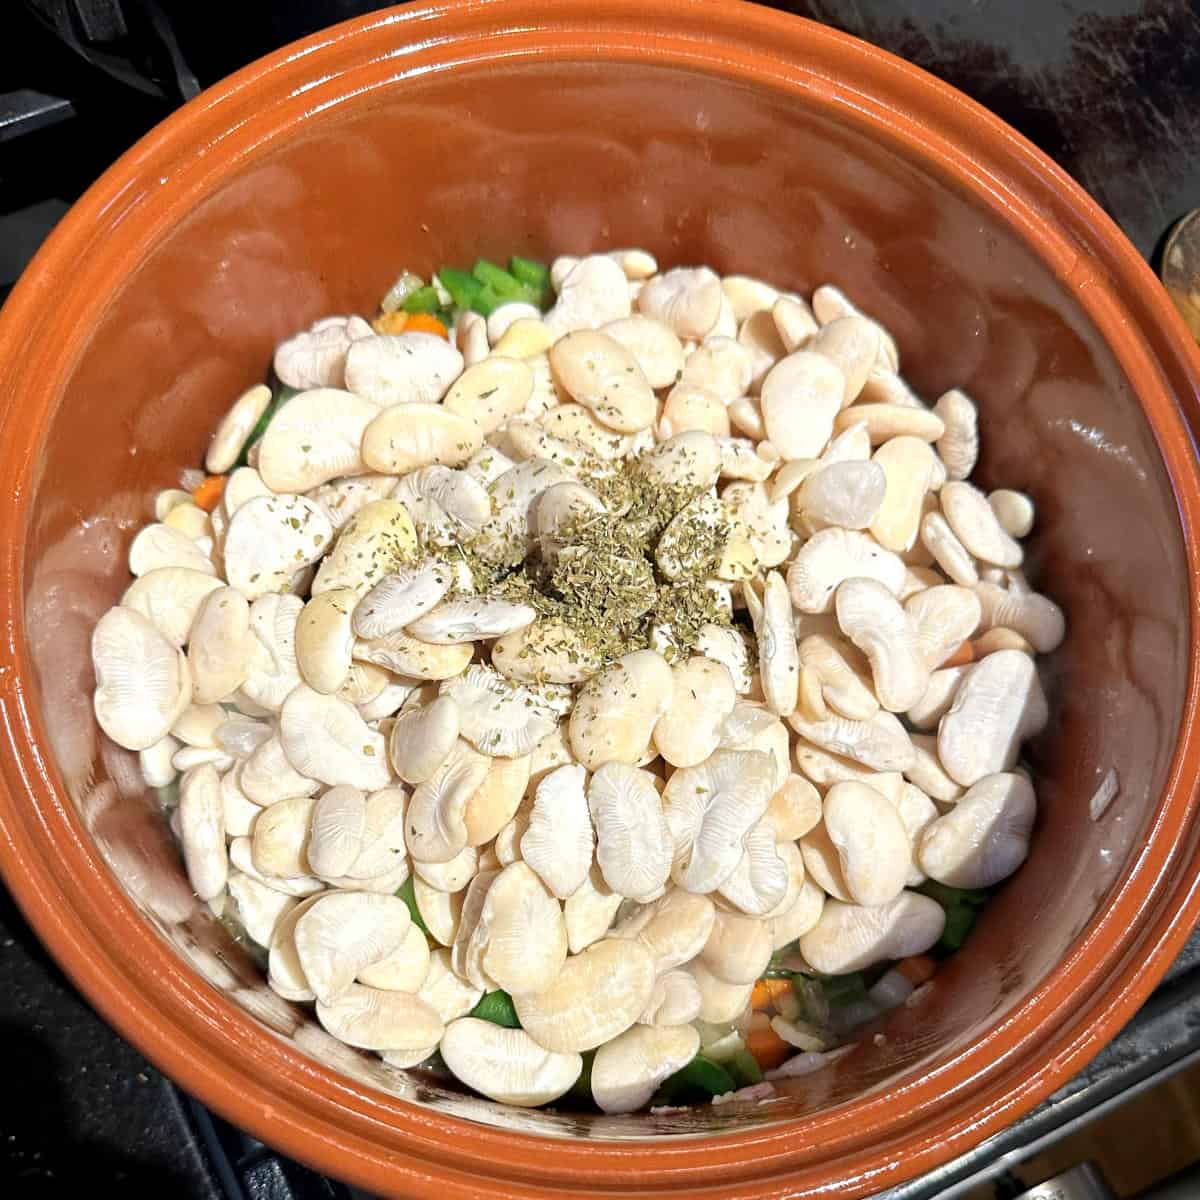 Lima beans and herbs added to pot for creamy butter beans recipe.